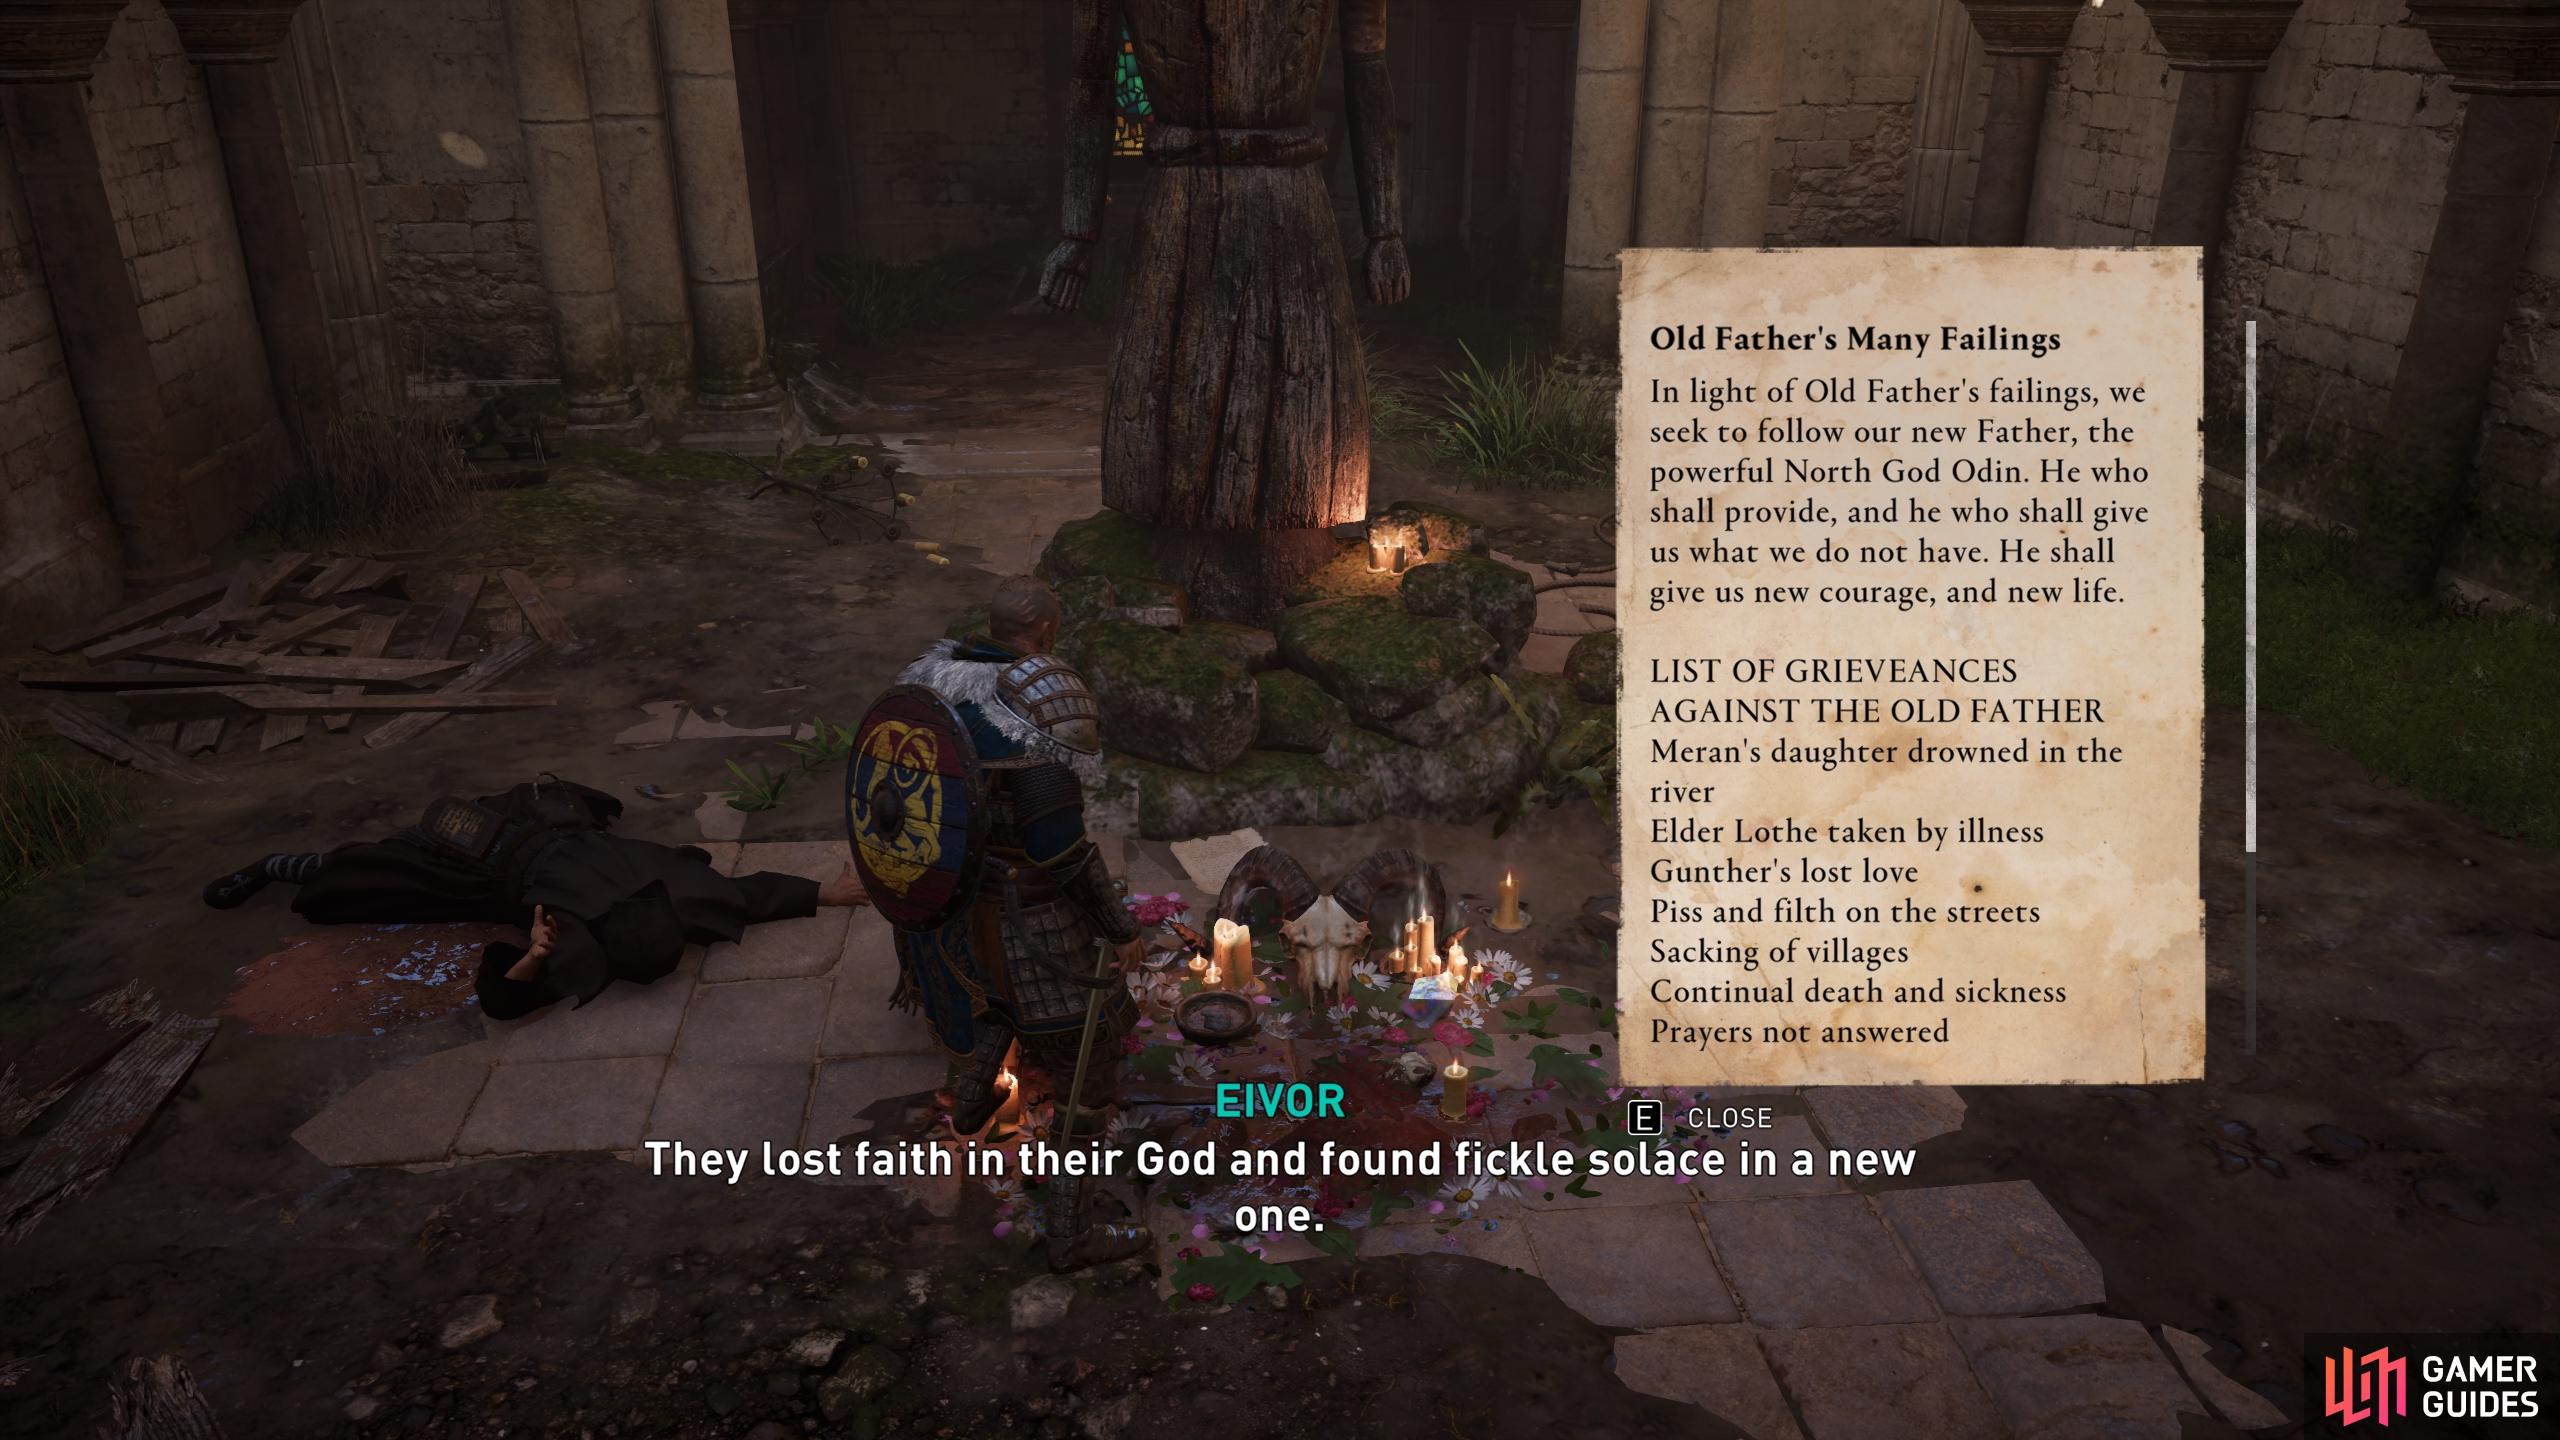 Once you've killed the attackers, read the note at the shrine to complete the quest.